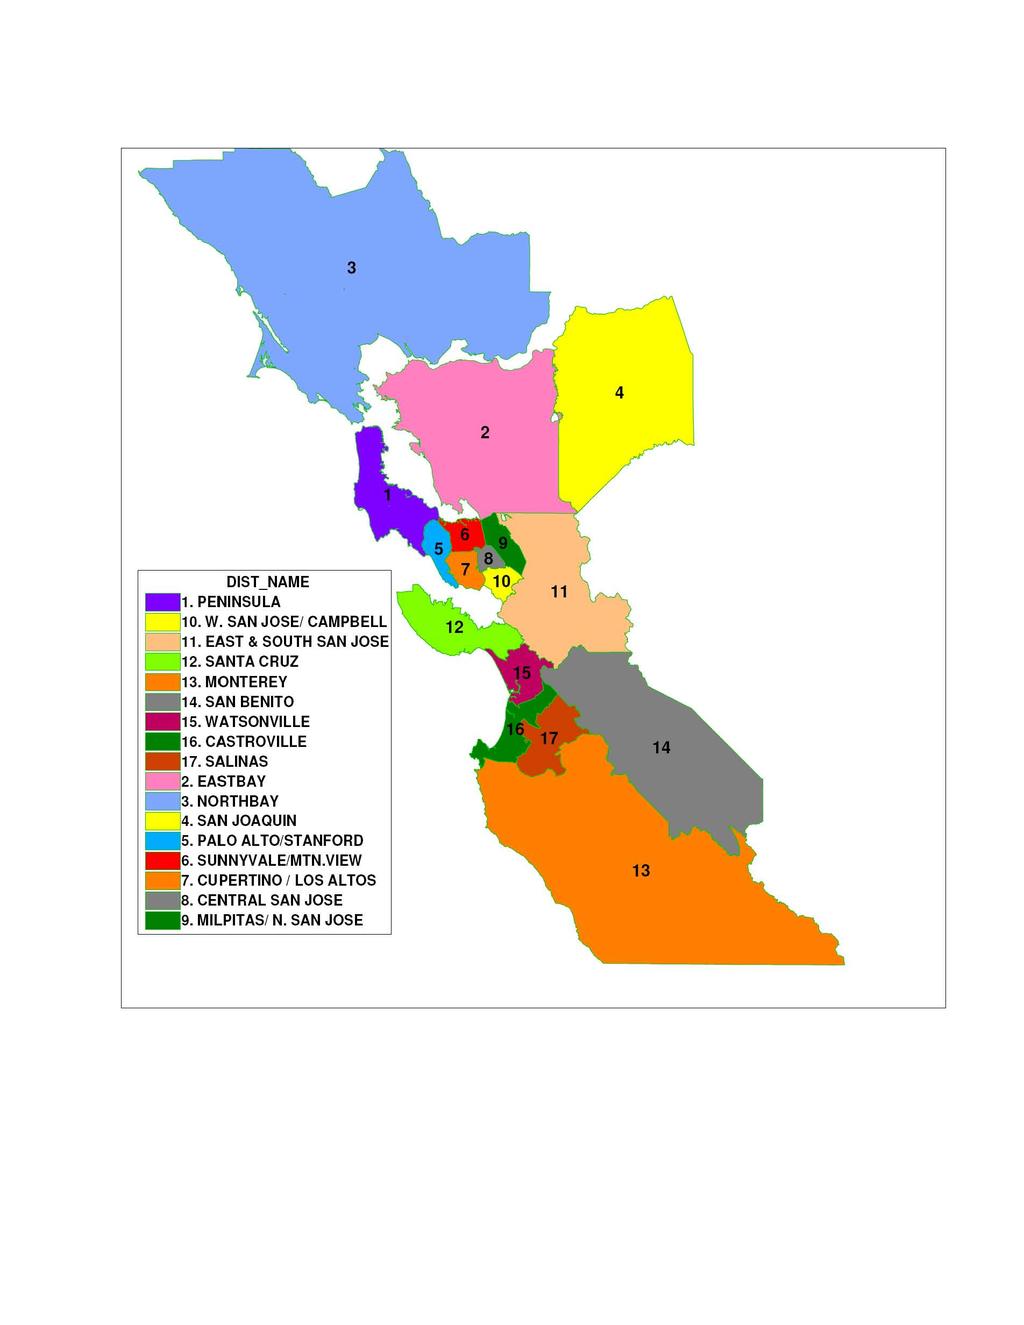 COMMUTER RAIL EXTENSION TO MONTEREY COUNTY RIDERSHIP VALIDATION REPORT Figure 1. Areas Defined by Each District 4 2 _1. DIST_NAME PENINSULA D lo. W. SAN JOSE/ CAMPBELL 11. EAST & SOUTH SAN 12.